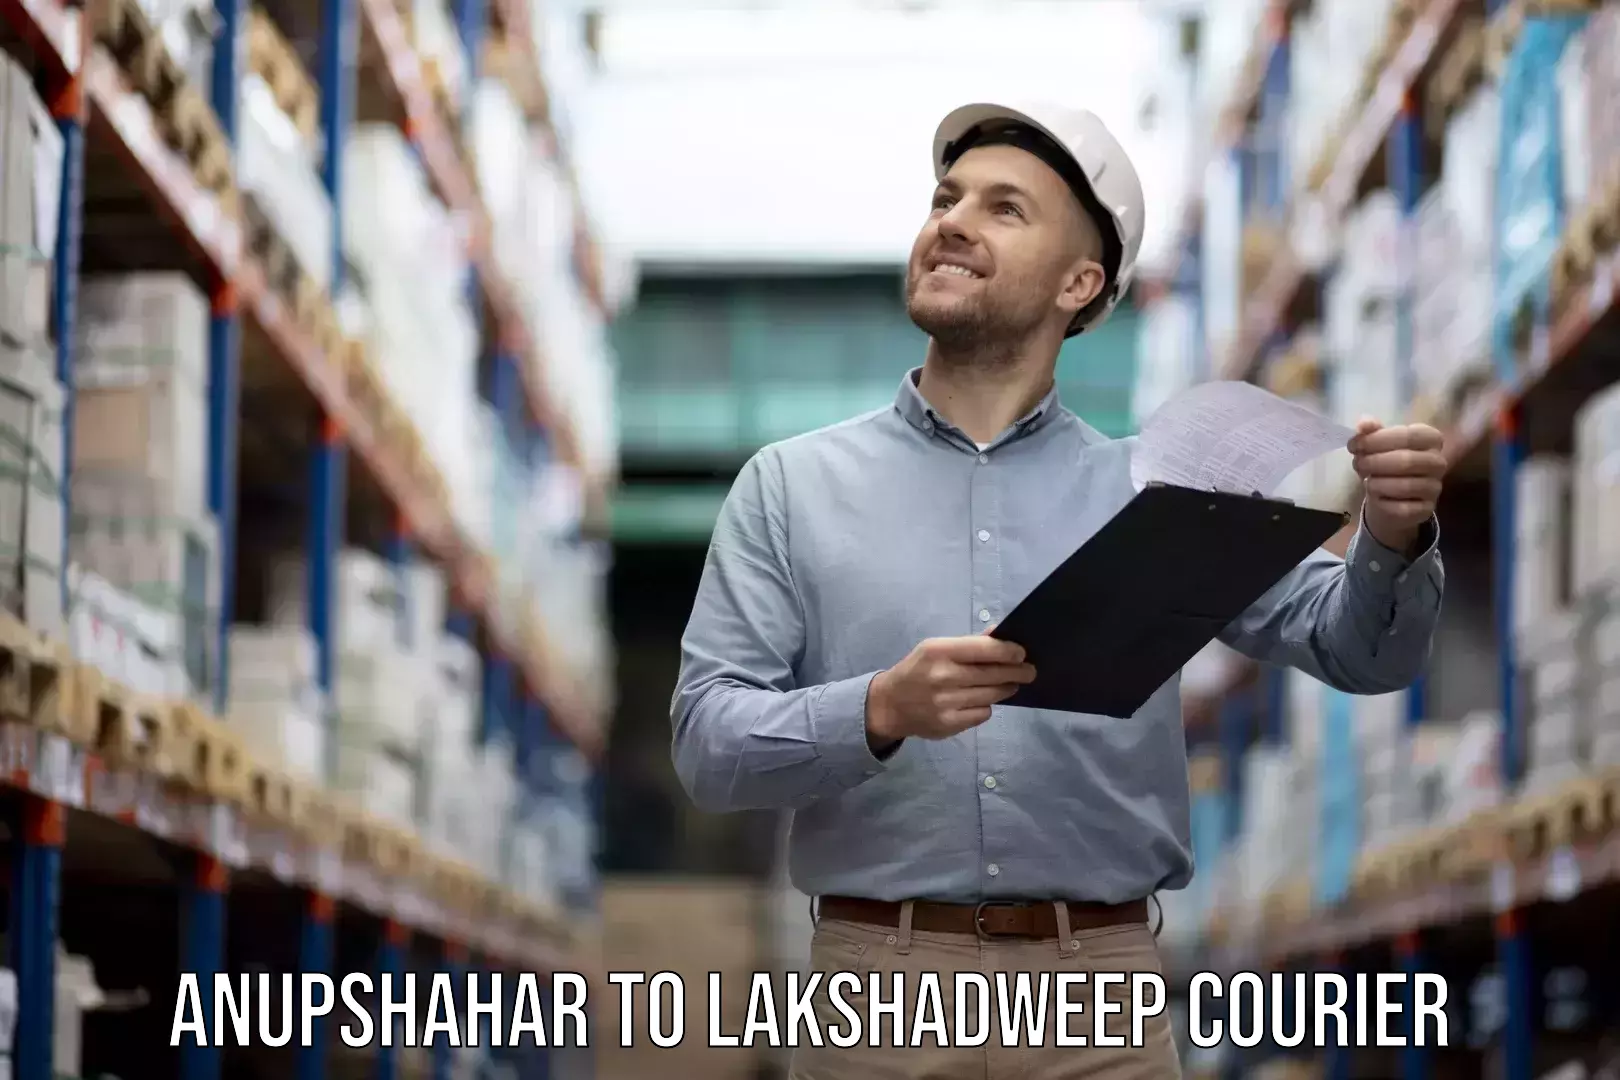 Furniture delivery service Anupshahar to Lakshadweep